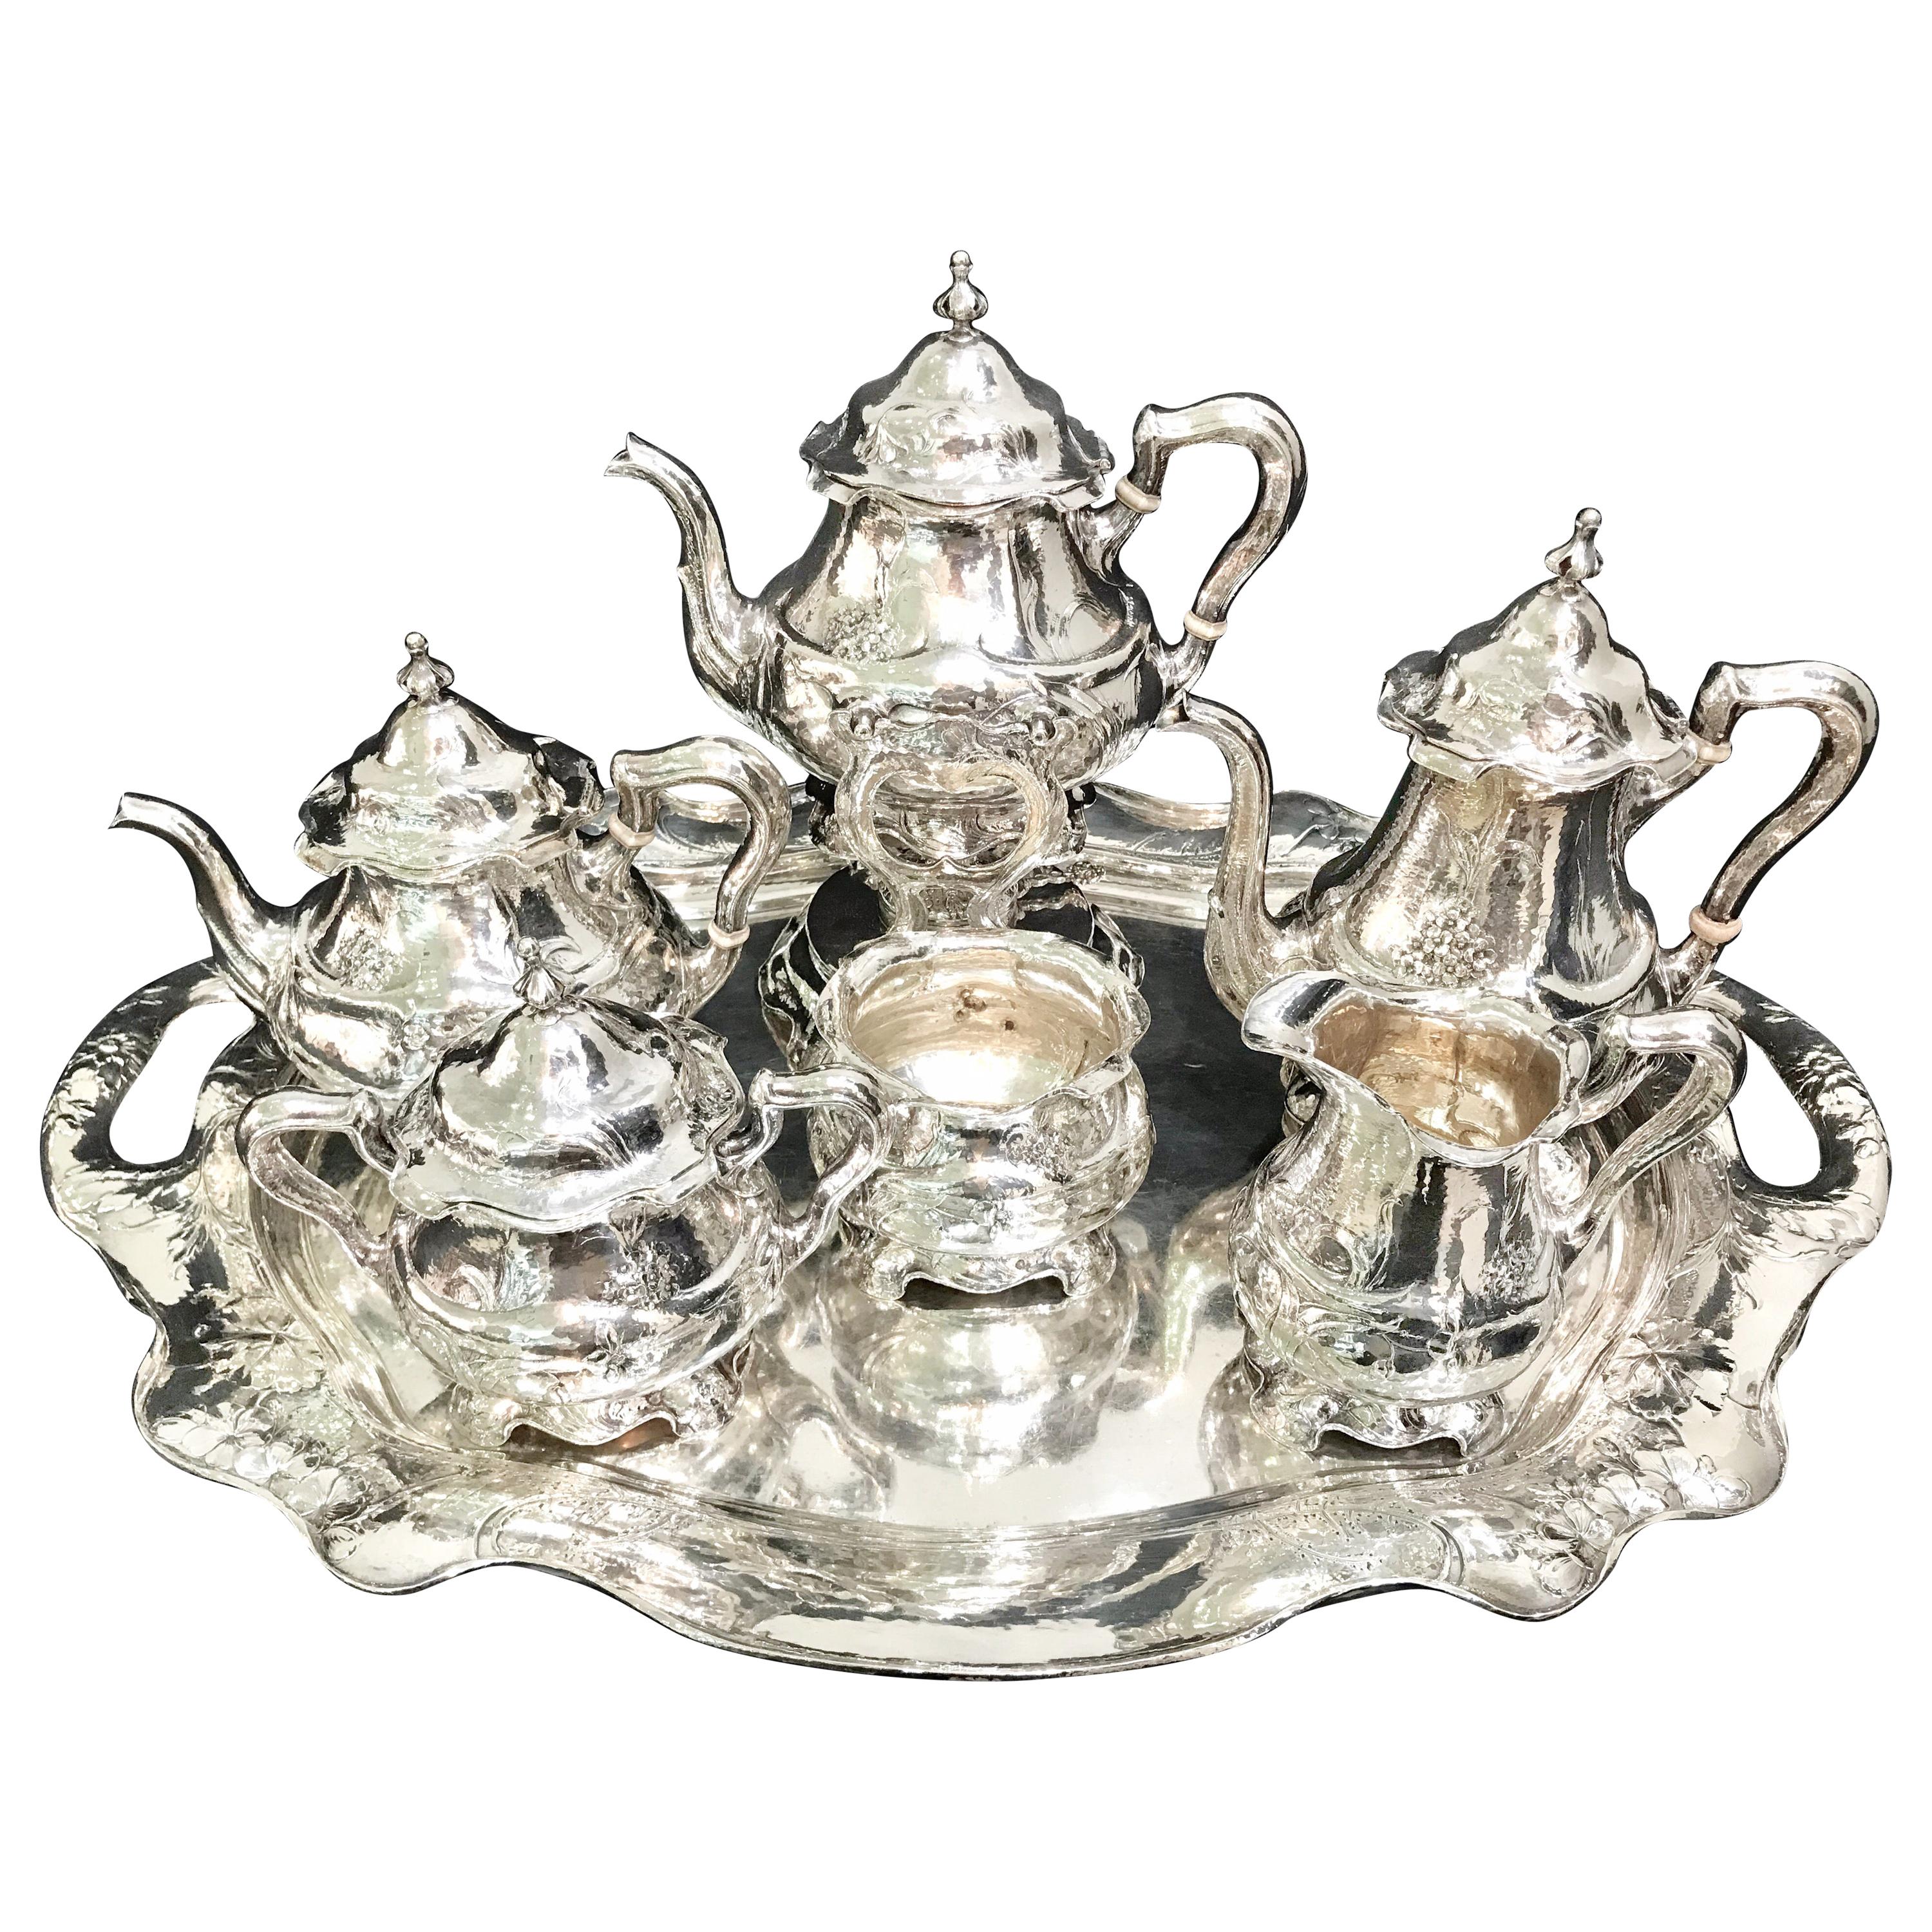 Martele by Gorham Silver Six Piece Coffee and Tea Service with Tray 1905-1907